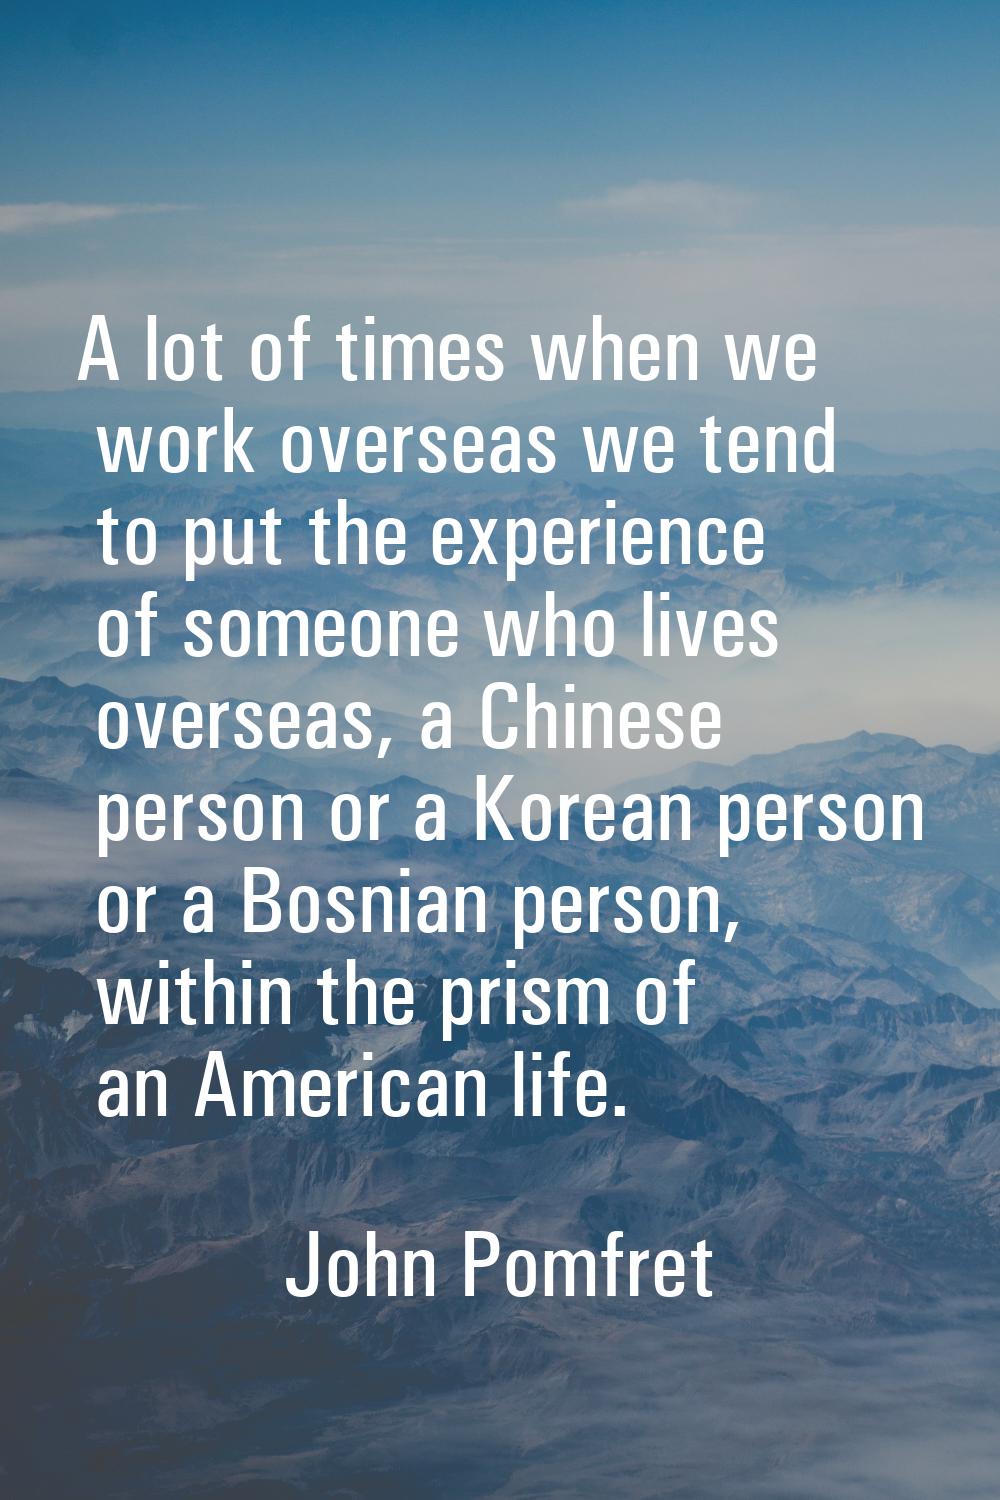 A lot of times when we work overseas we tend to put the experience of someone who lives overseas, a